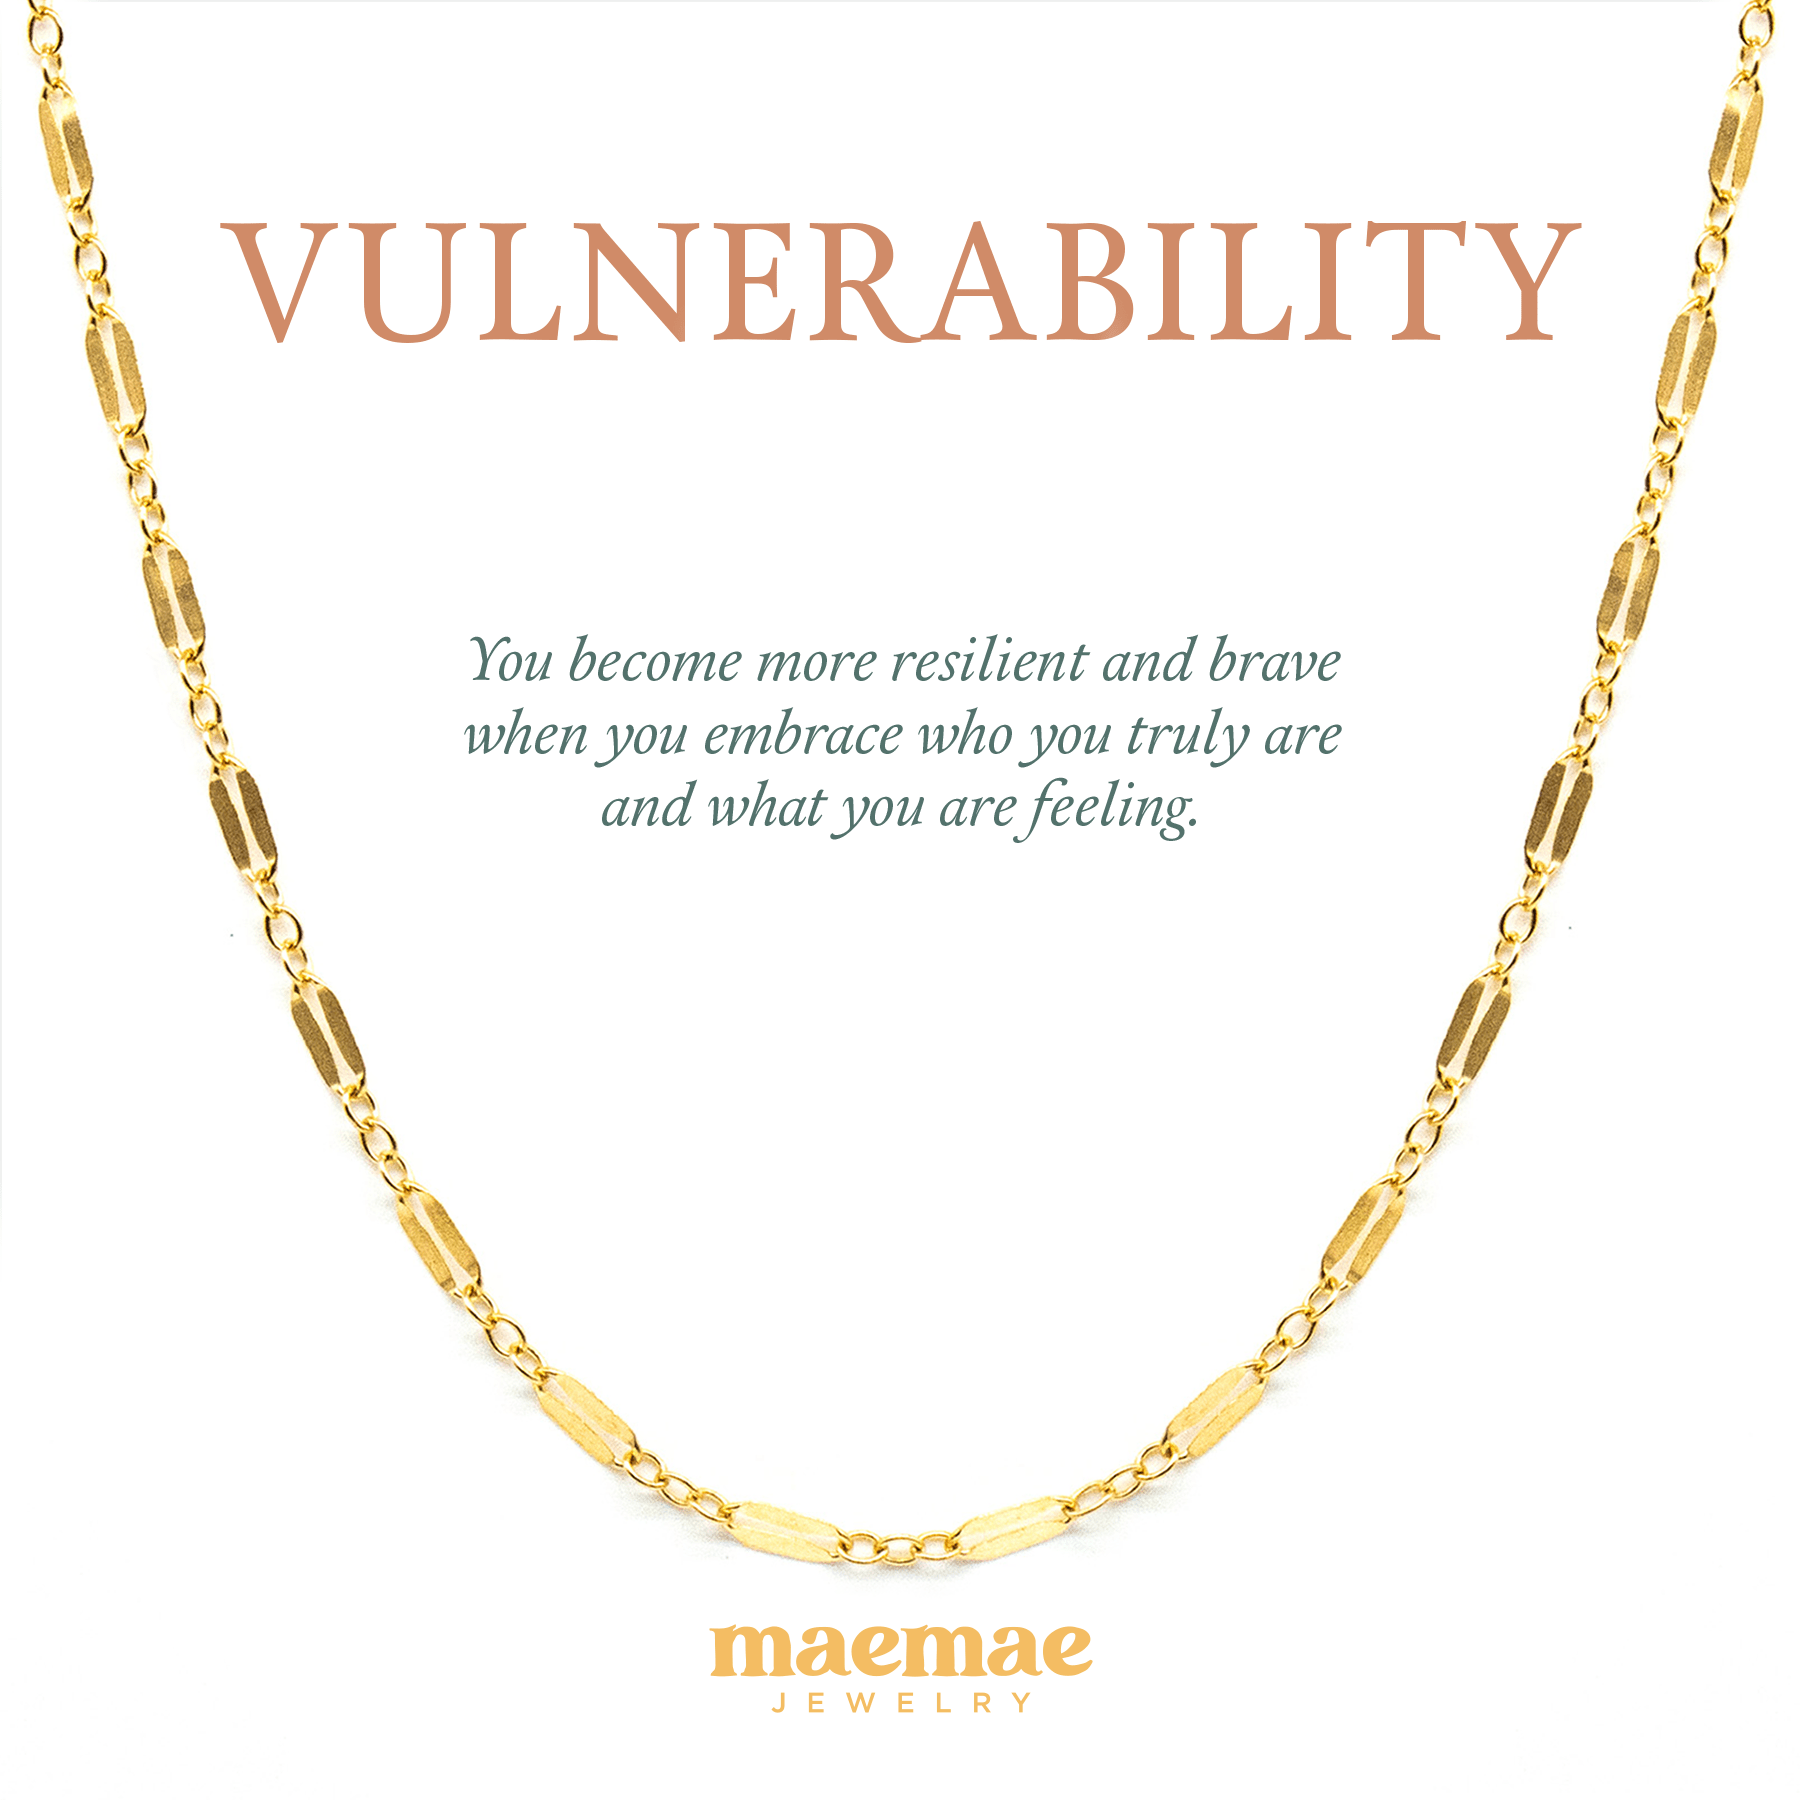 MaeMae Jewelry vulnerability necklace on affirmation card